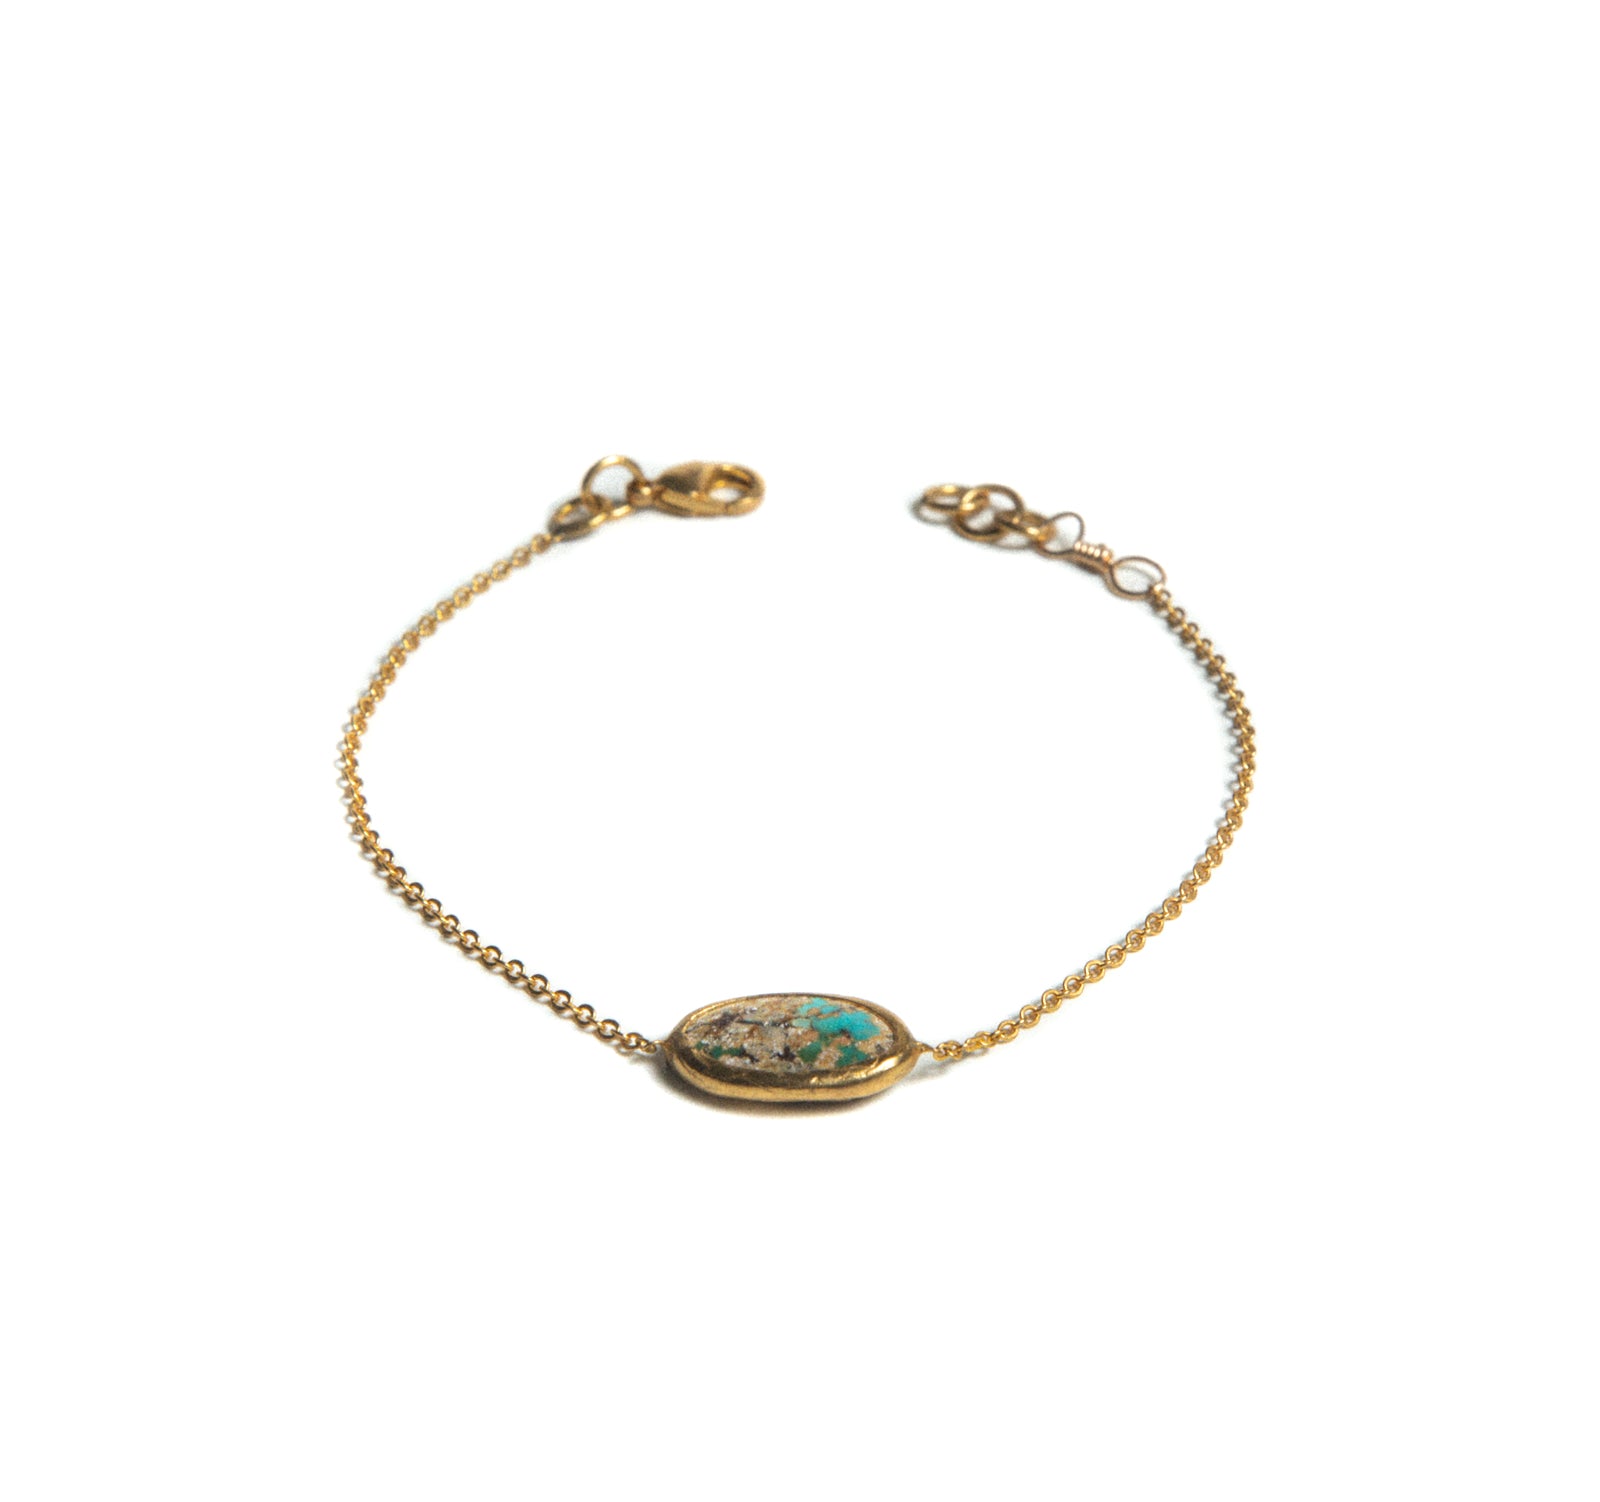 Women's Dainty Turquoise stone thin adjustable chain gold bracelet at RM kandy 